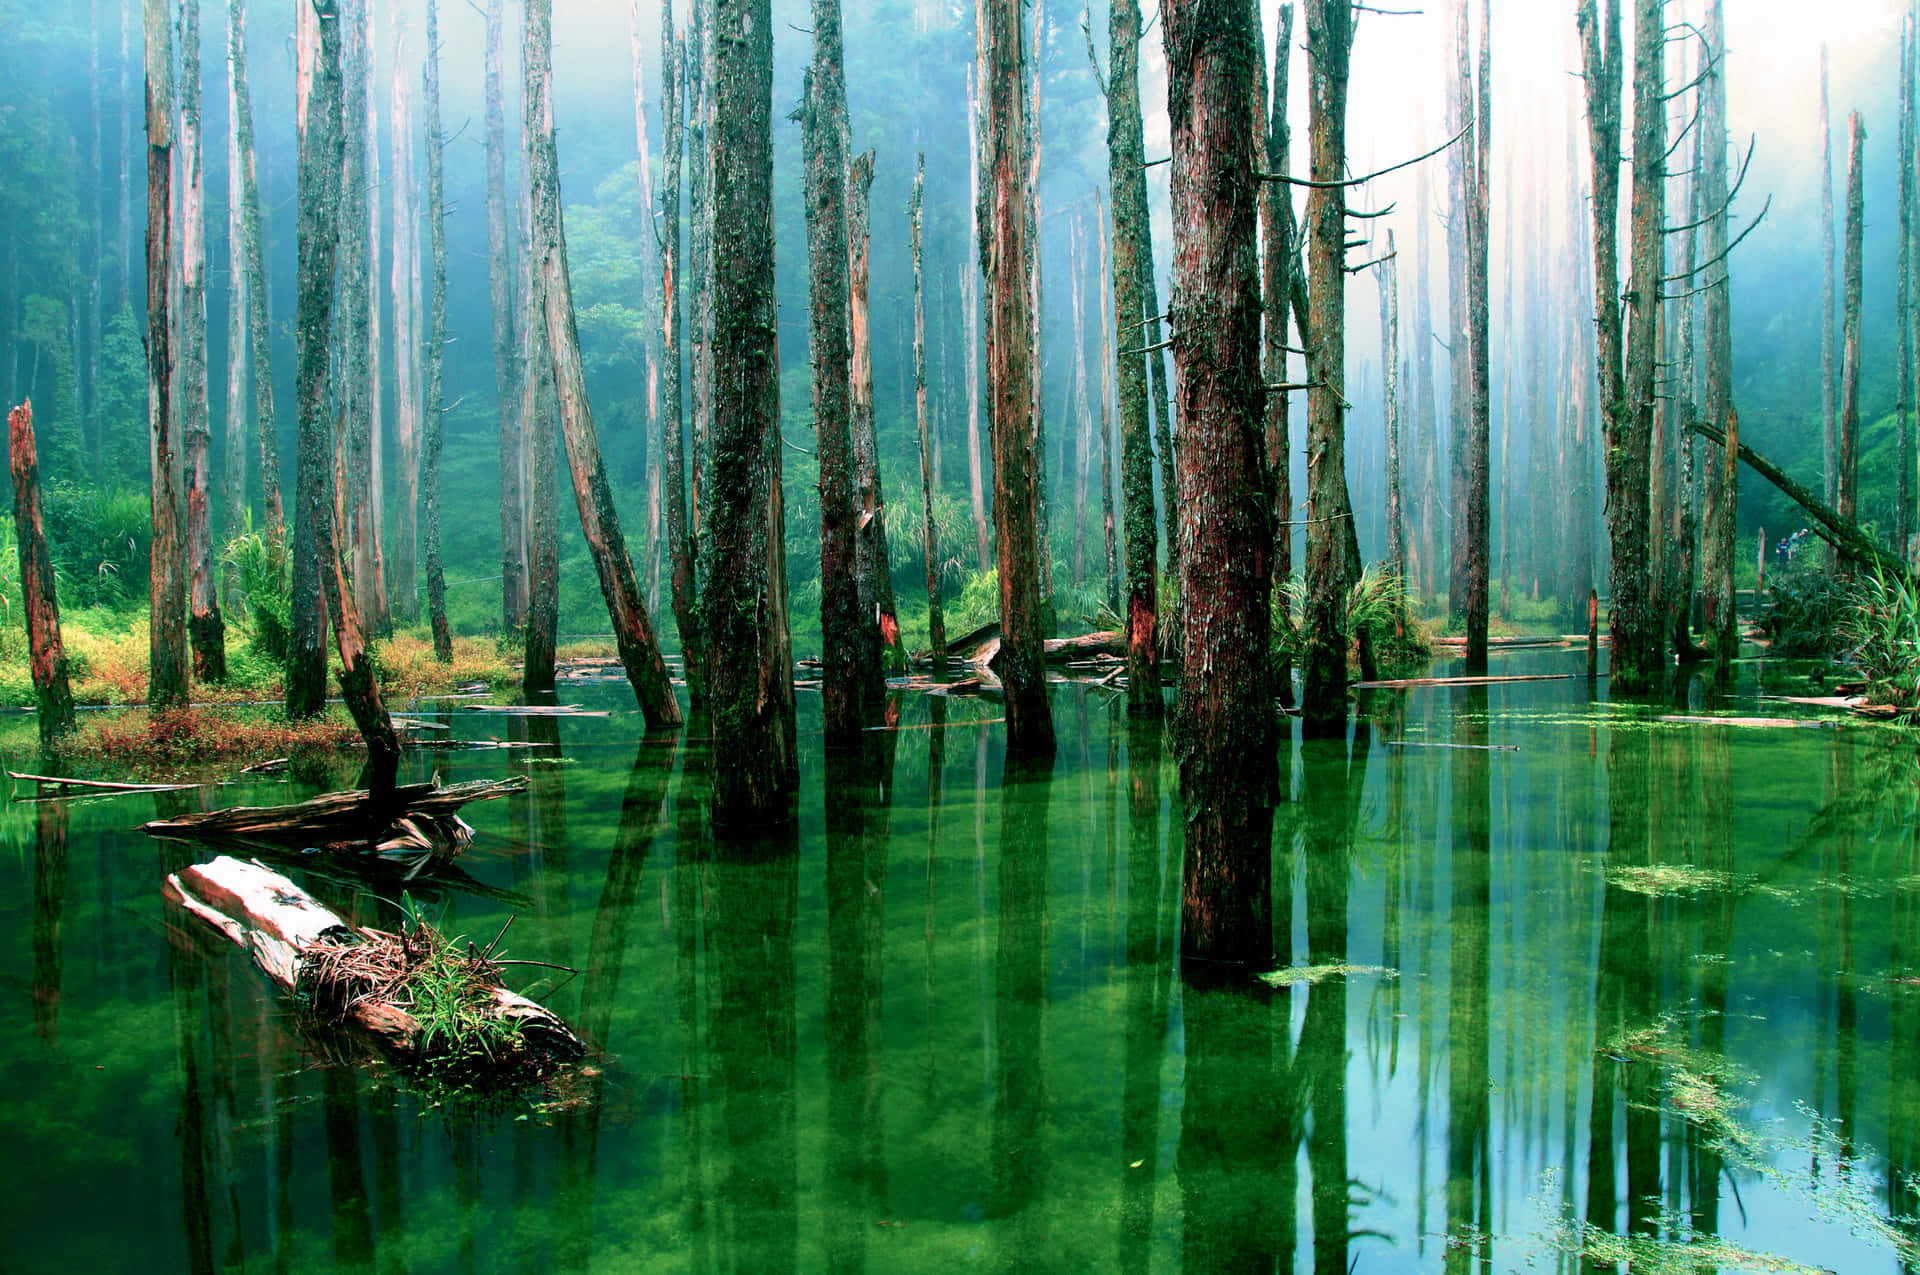 "Explore the beauty of a tranquil swamp"